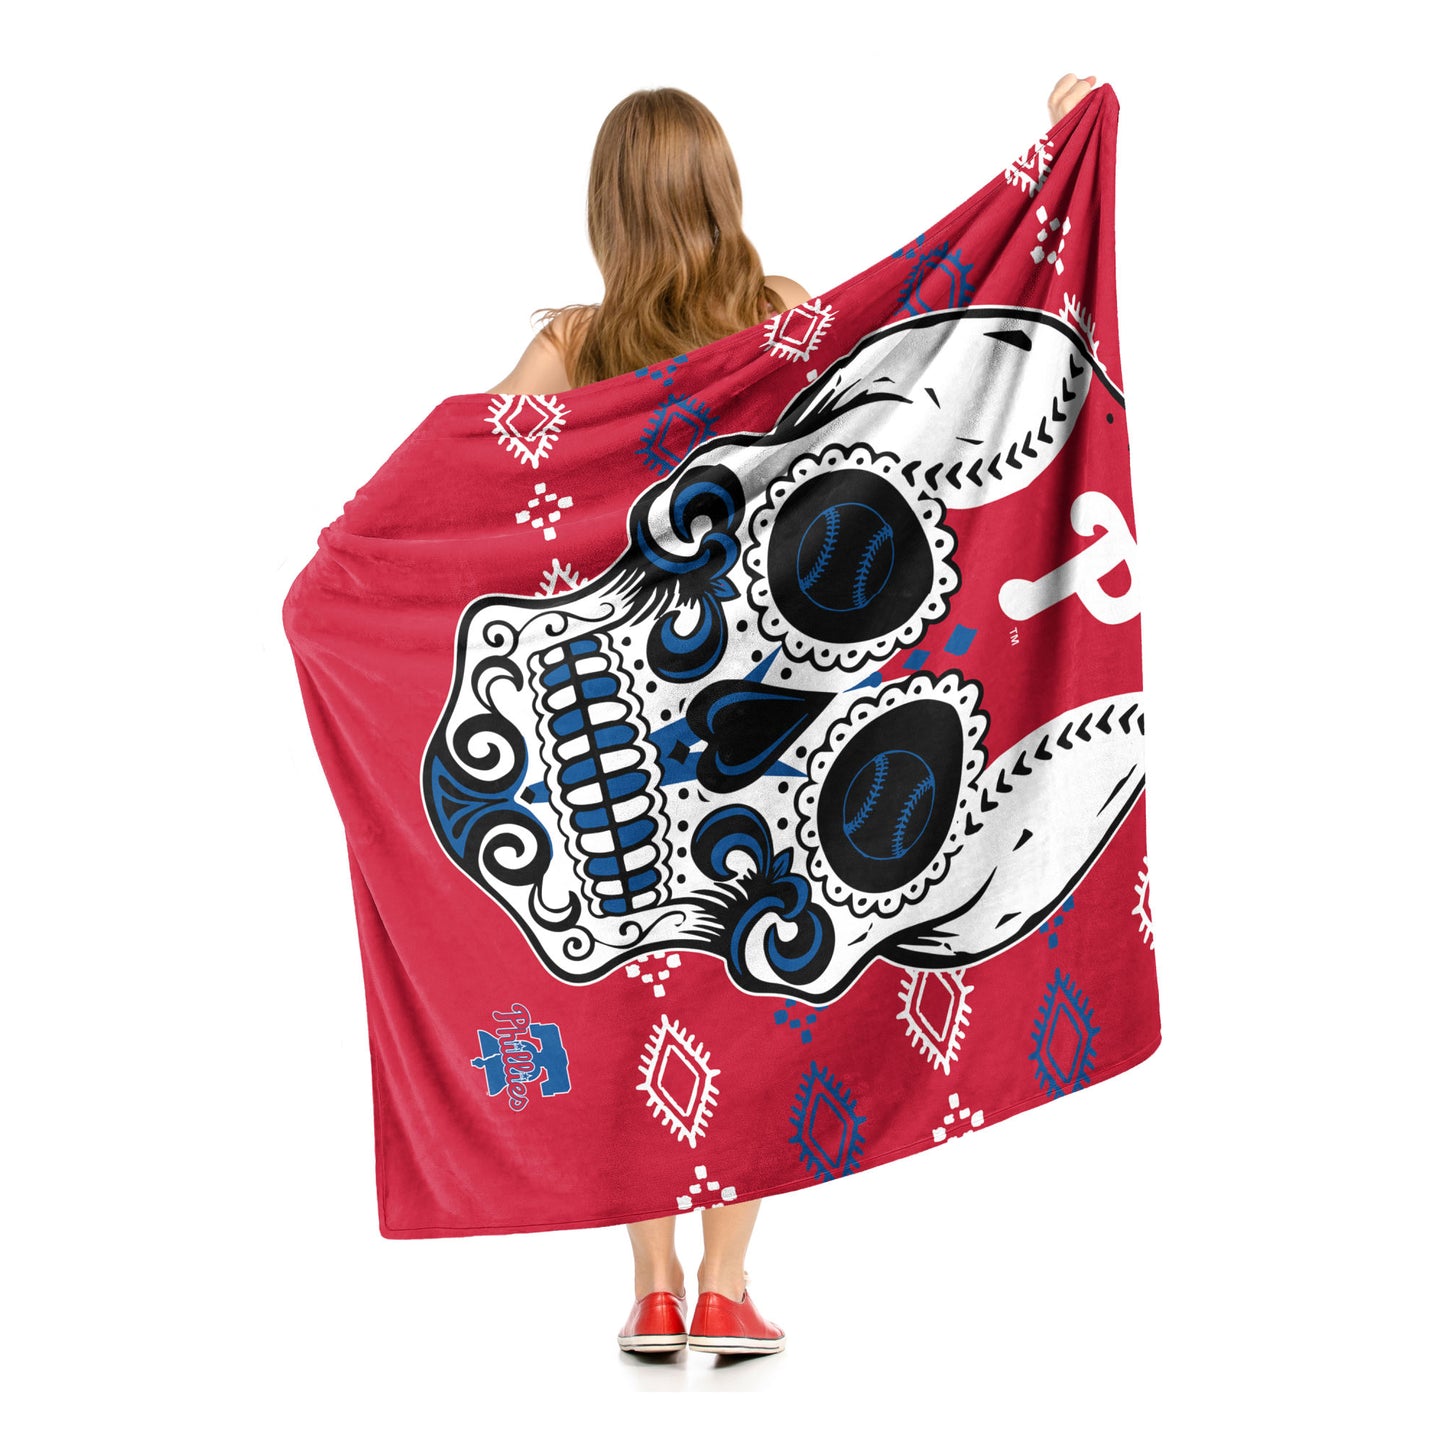 CANDY SKULL - PHILLIES Silk Touch Throw 50"x60"